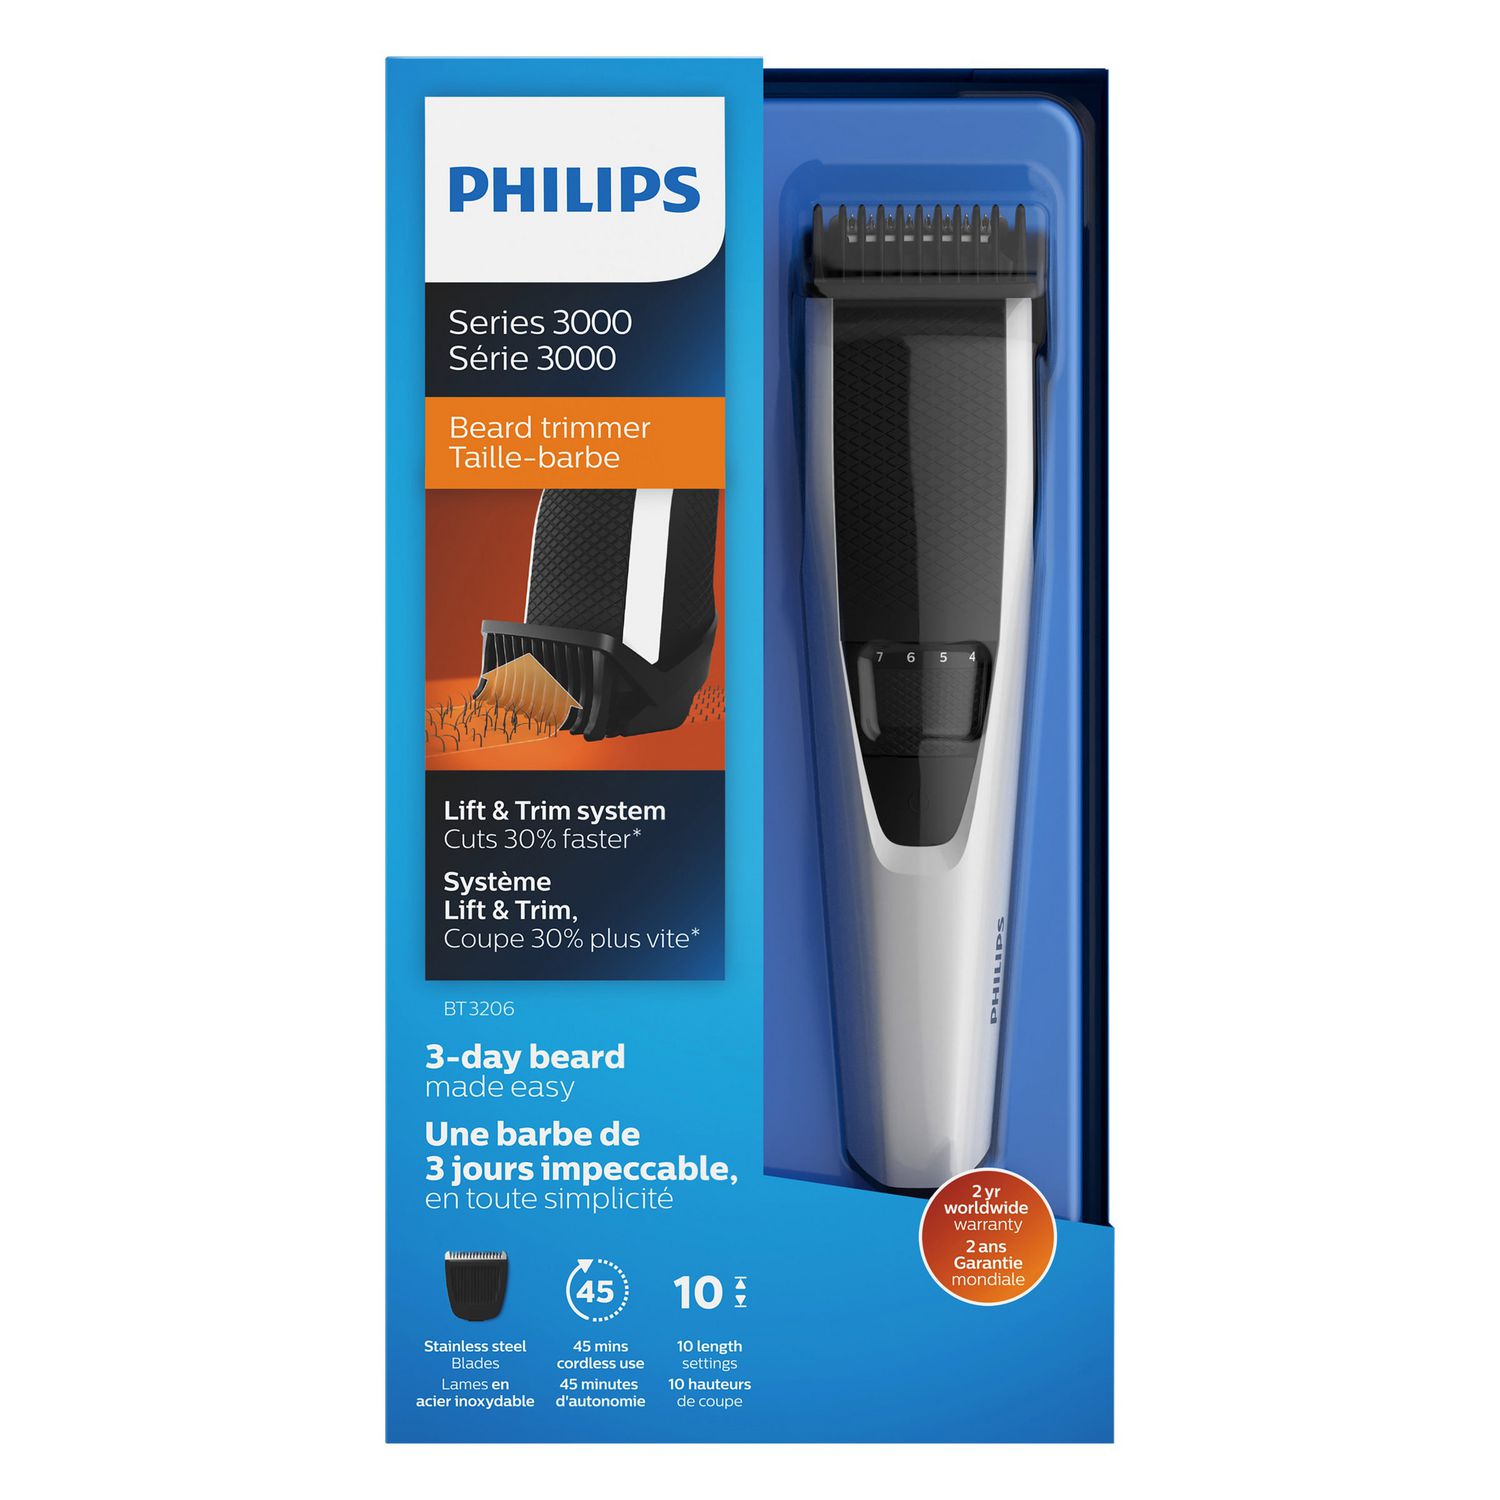 charger for philips trimmer series 3000